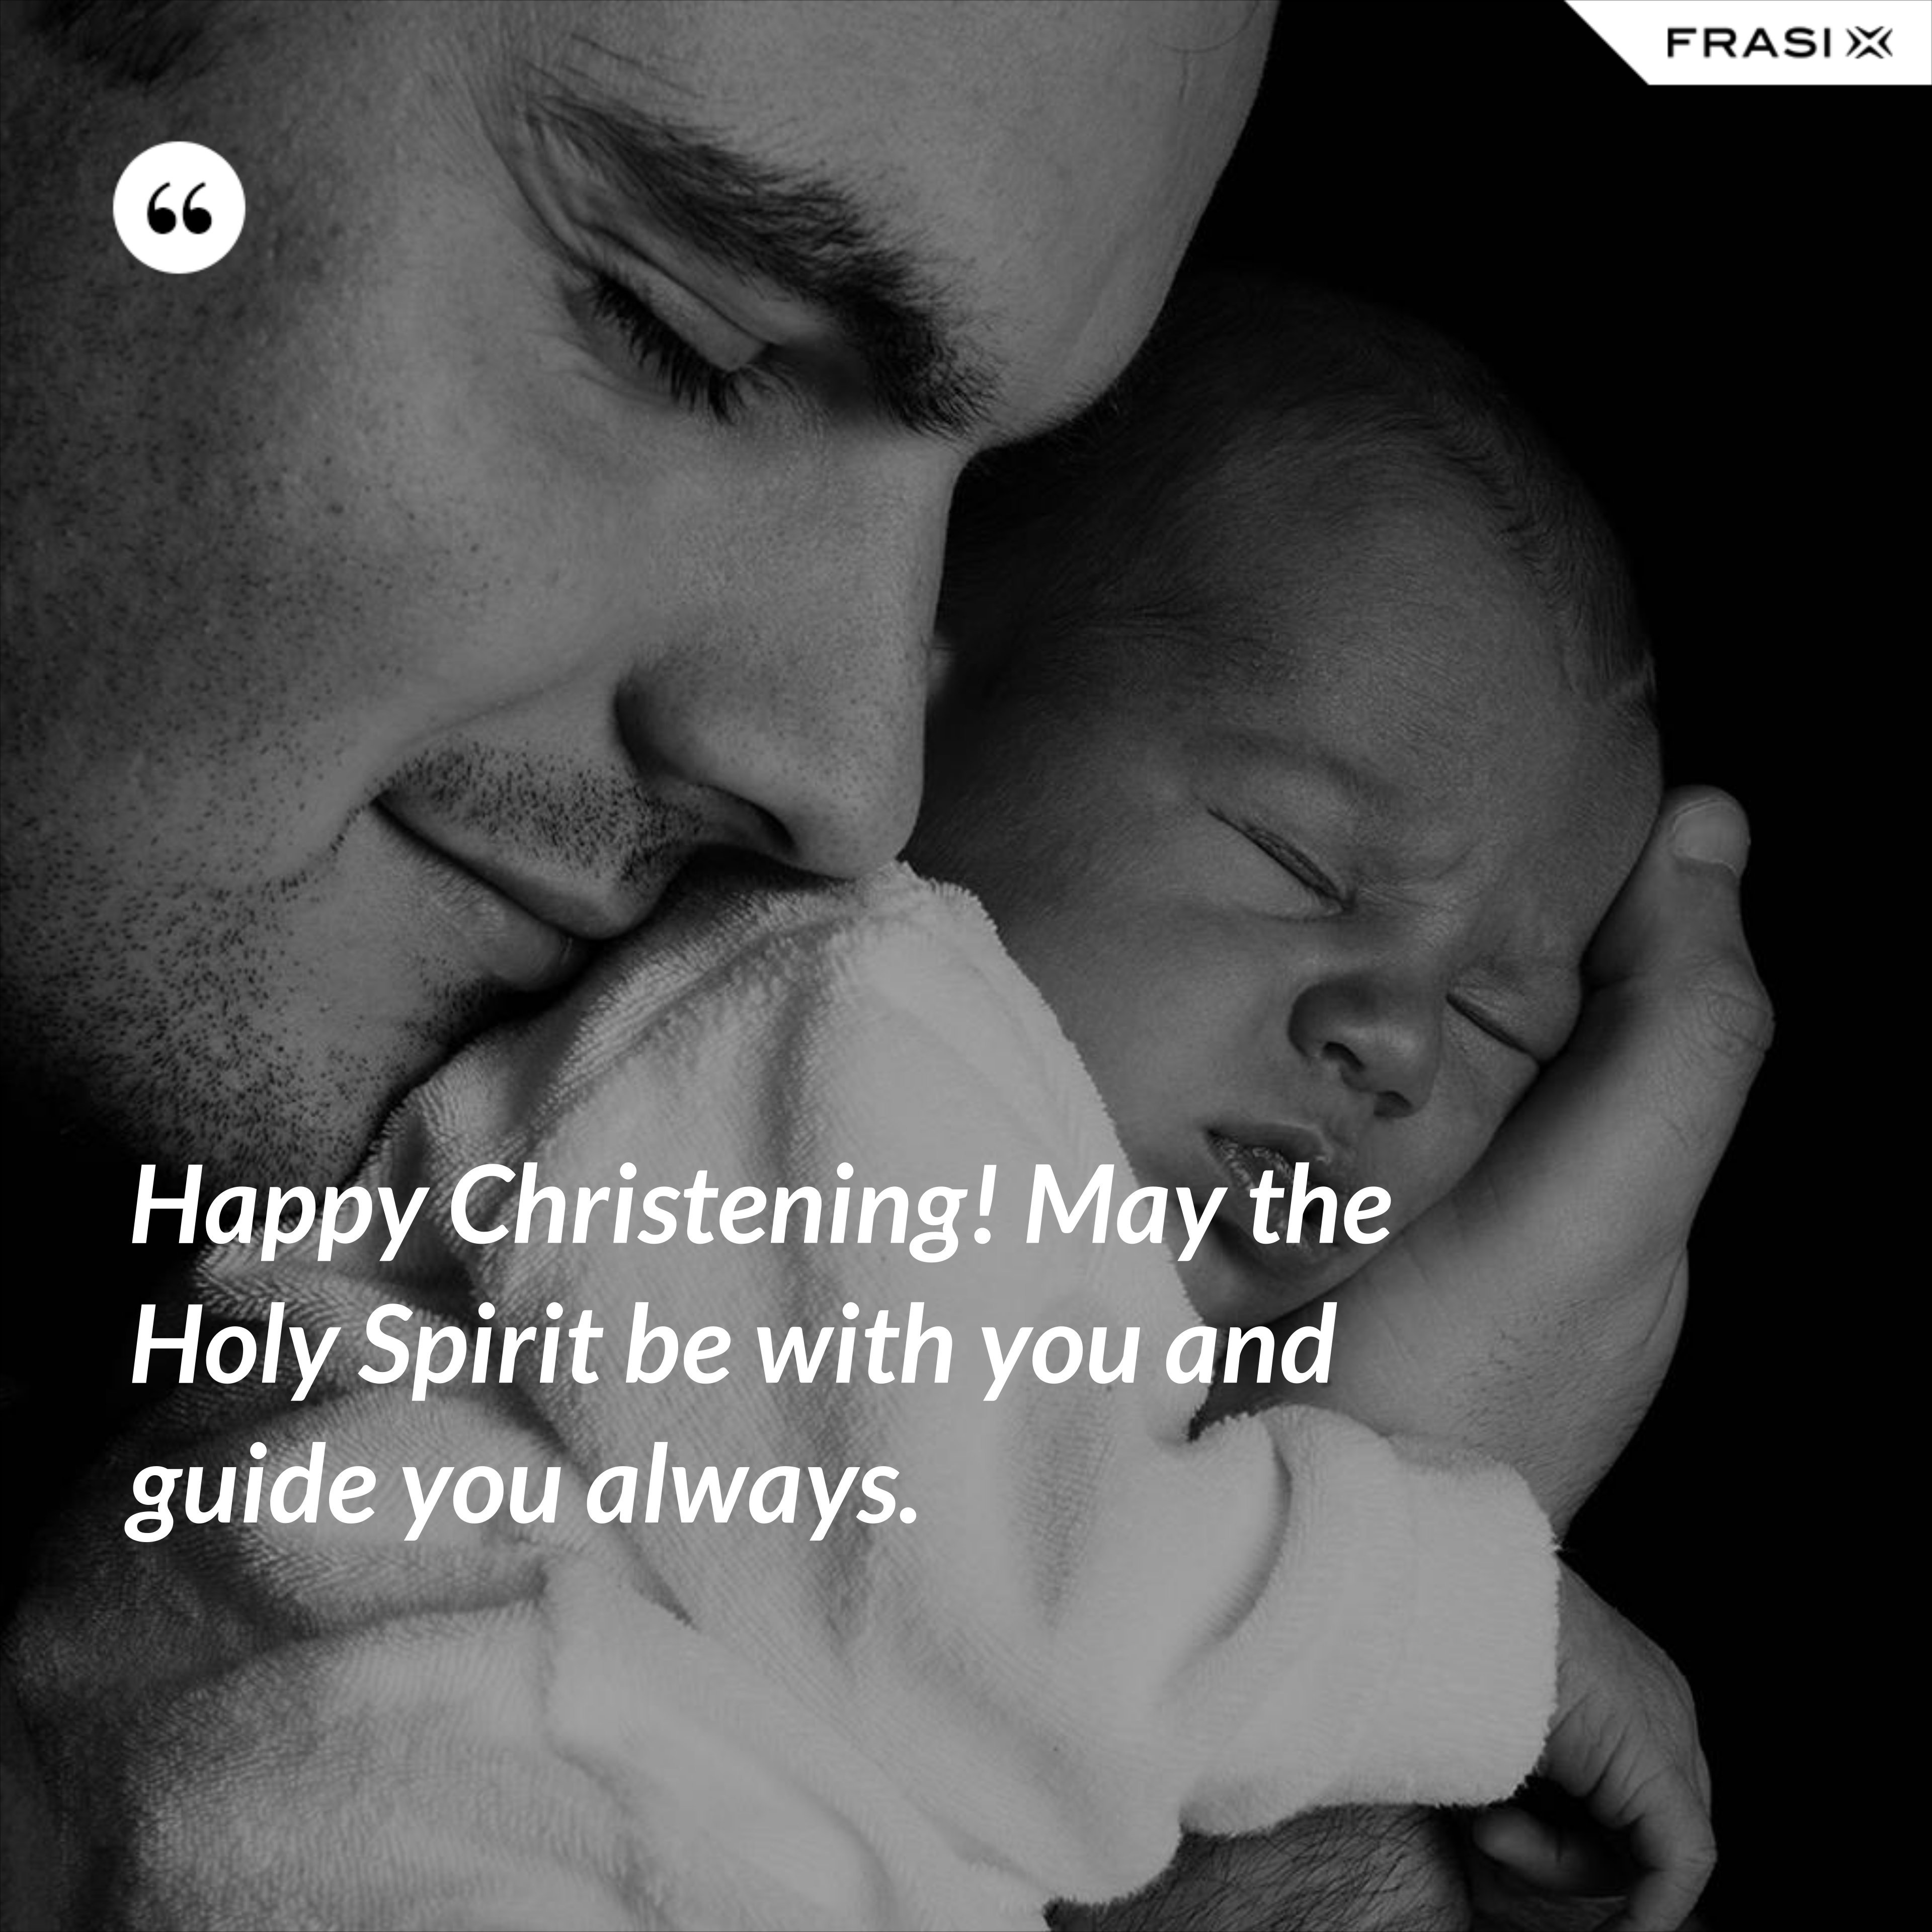 Happy Christening! May the Holy Spirit be with you and guide you always. - Anonimo